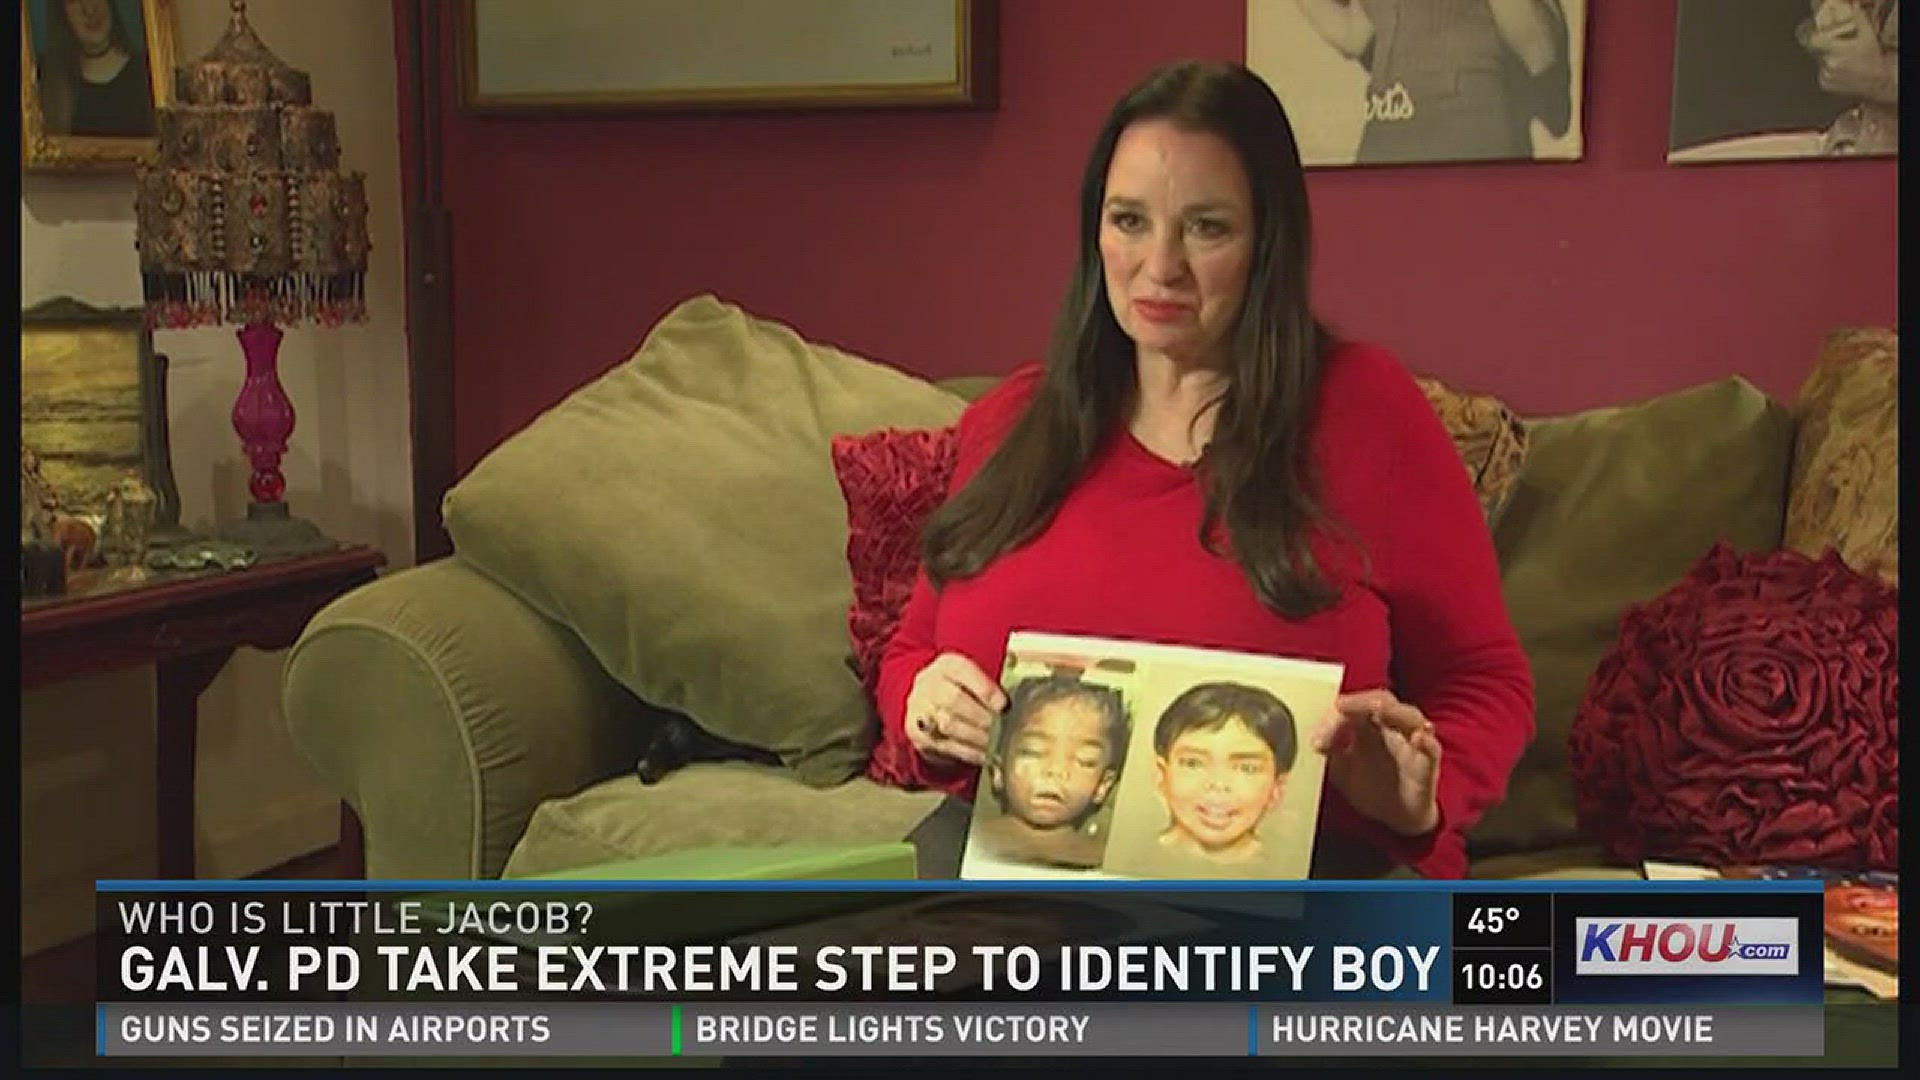 Lois Gibson is a nationally known forensic artist. She's worked on six cases similar to this one, including the Baby Grace case in 2007. Of the six cases, this recent one is the only one that remains unsolved.